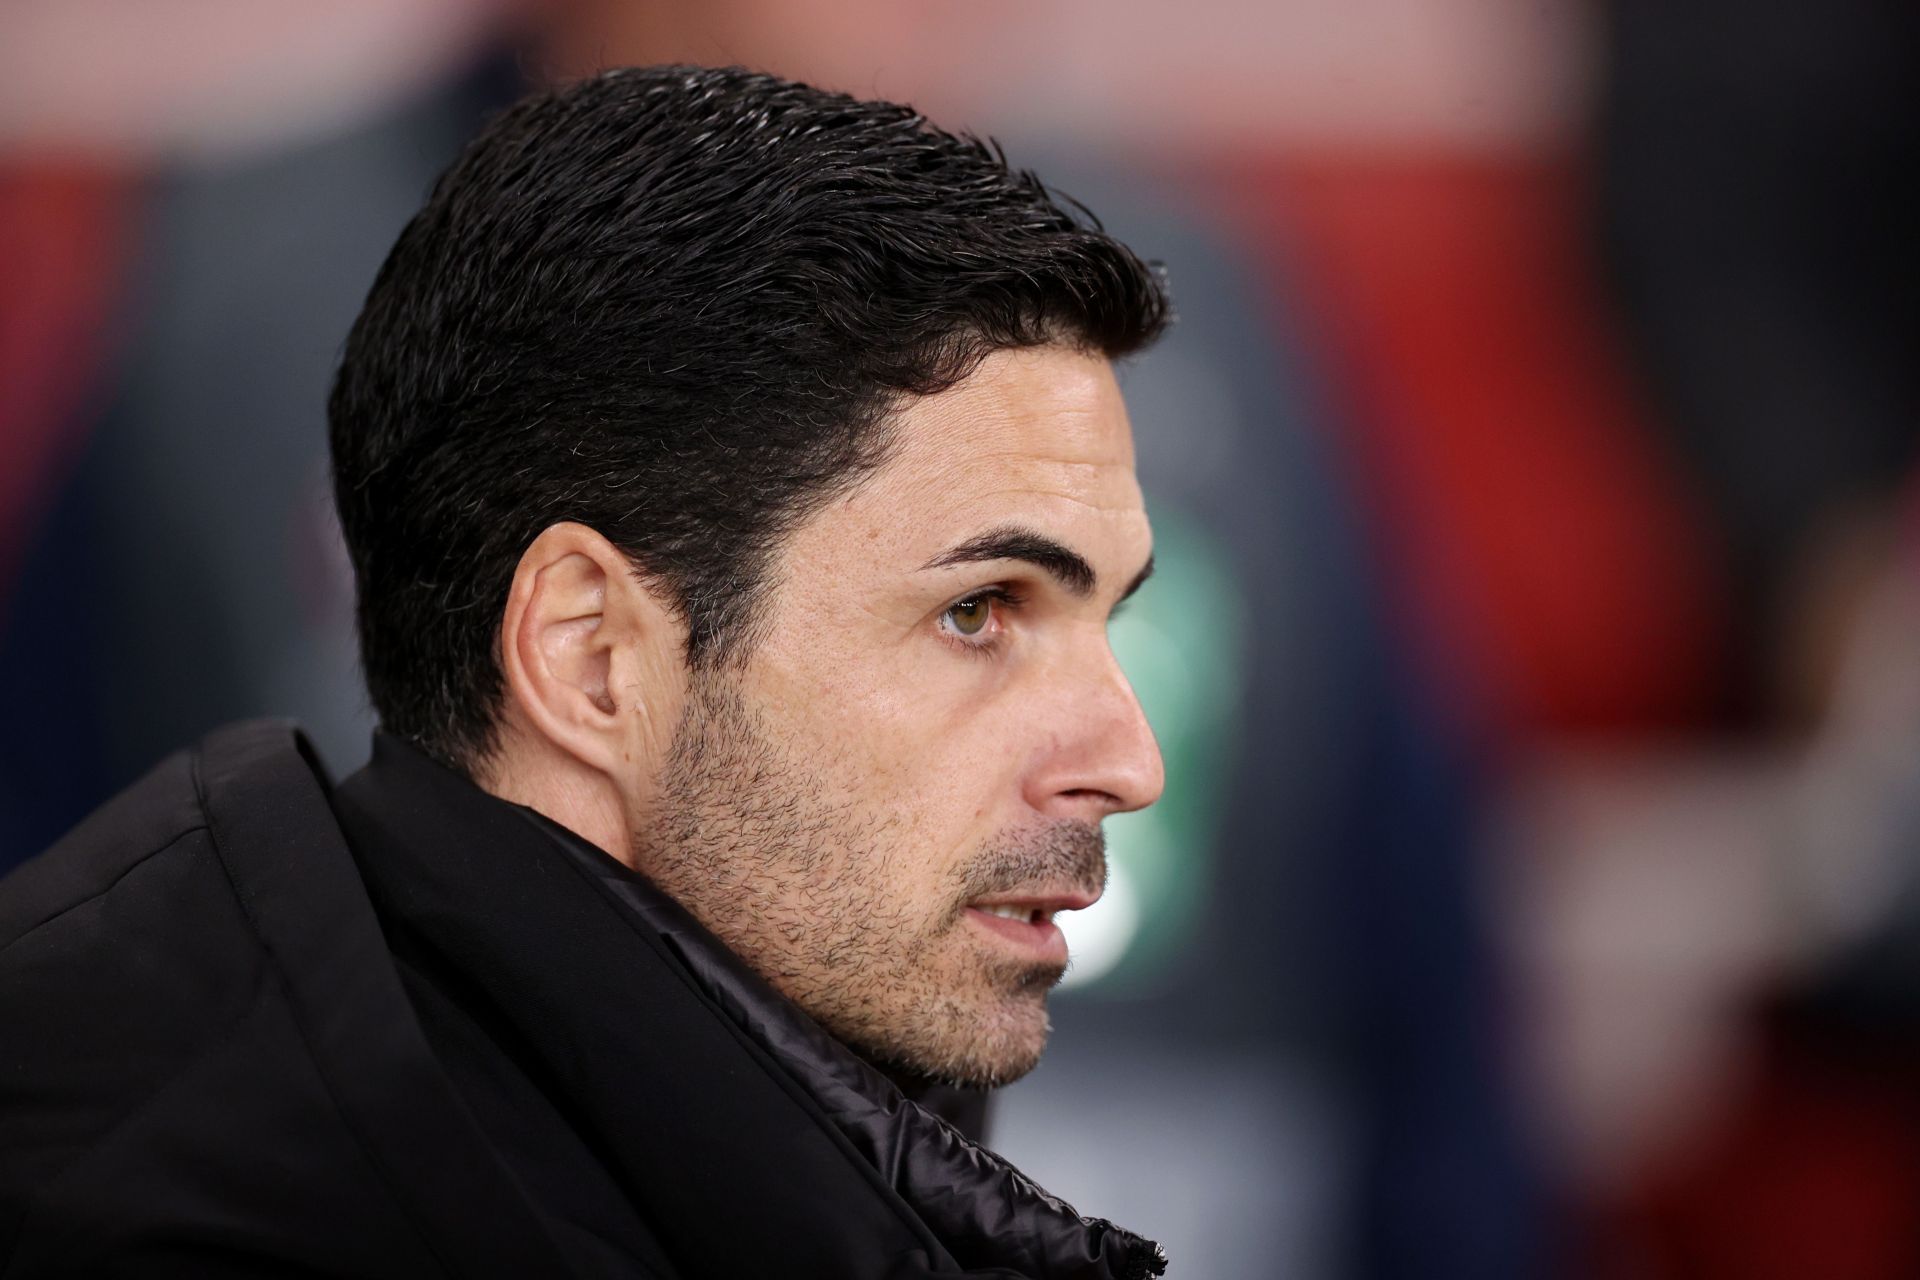 Gunners manager Mikel Arteta looks on during a match.